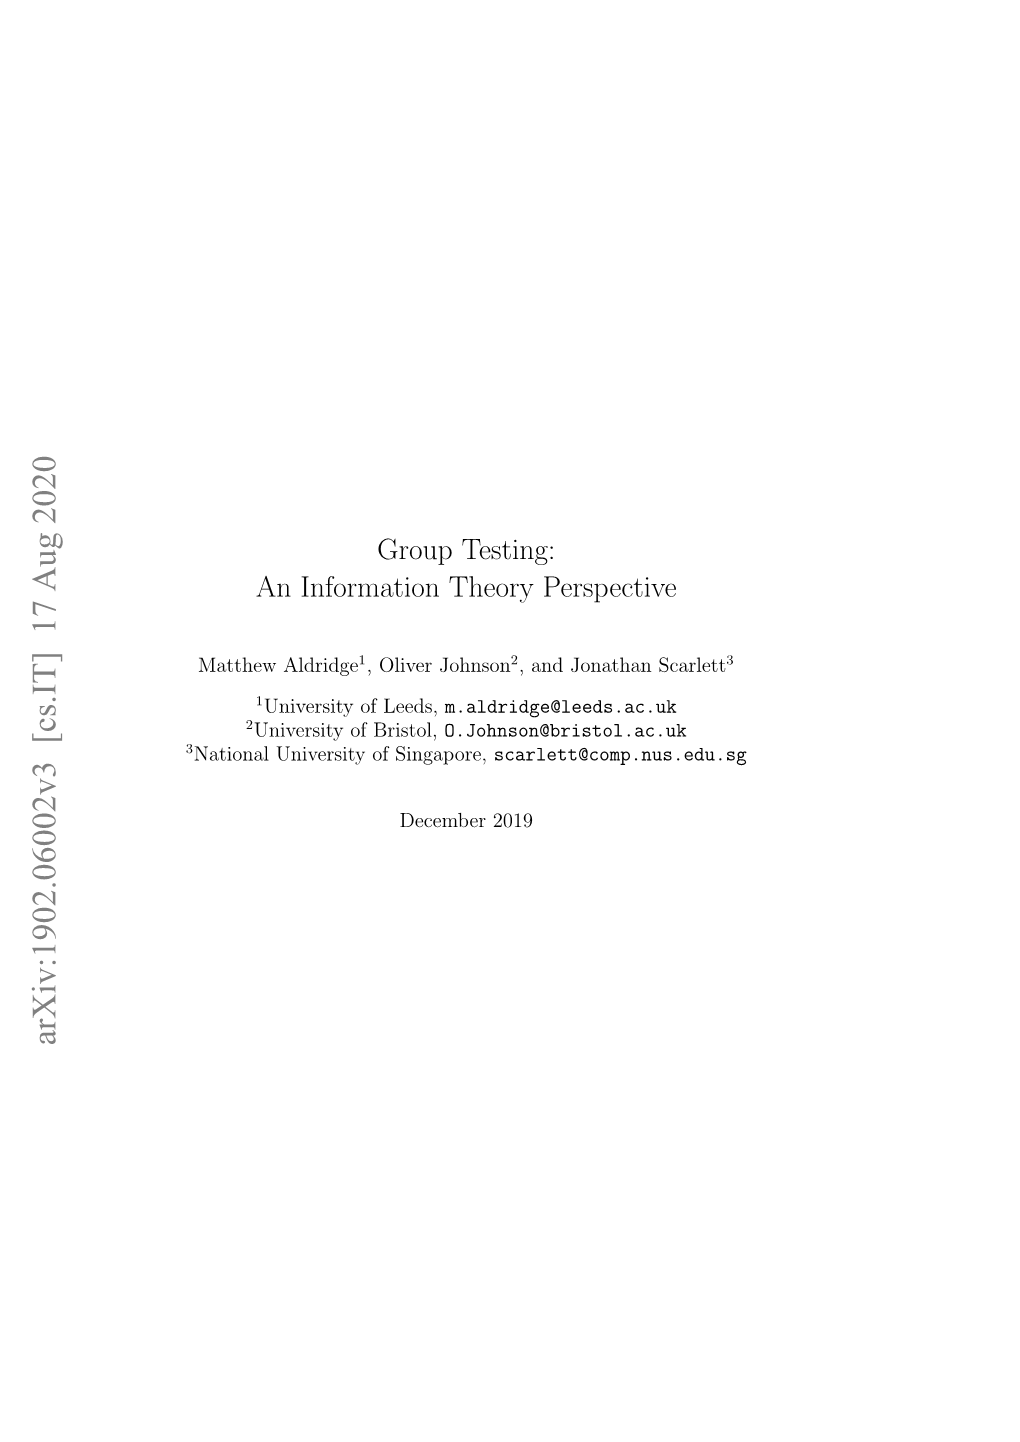 Group Testing: an Information Theory Perspective